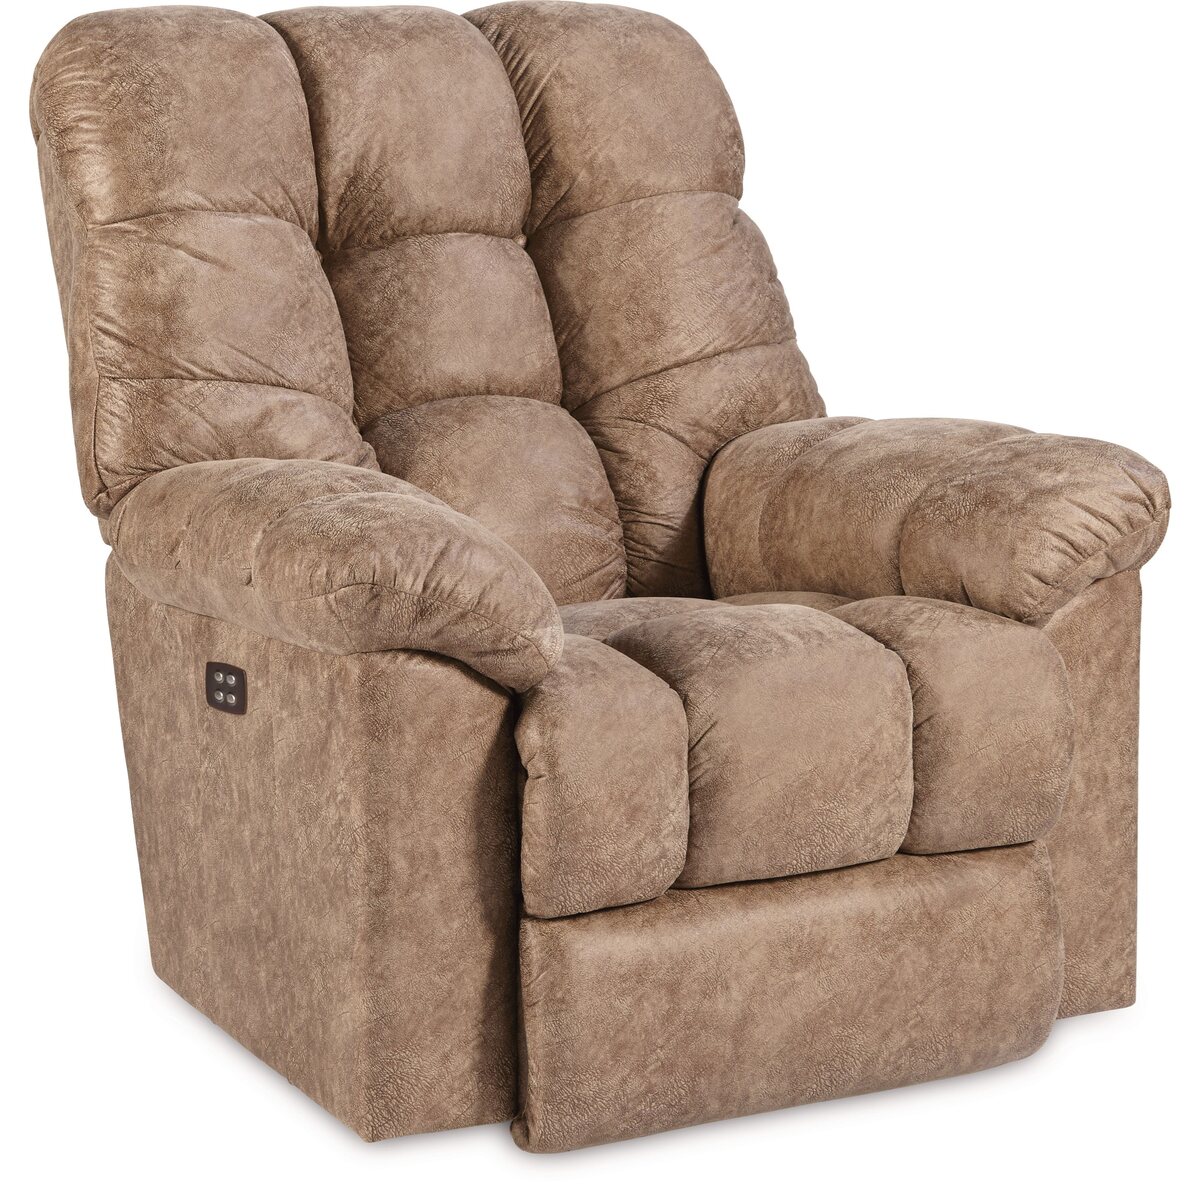 What Recliner Is Better Than Lazy Boy